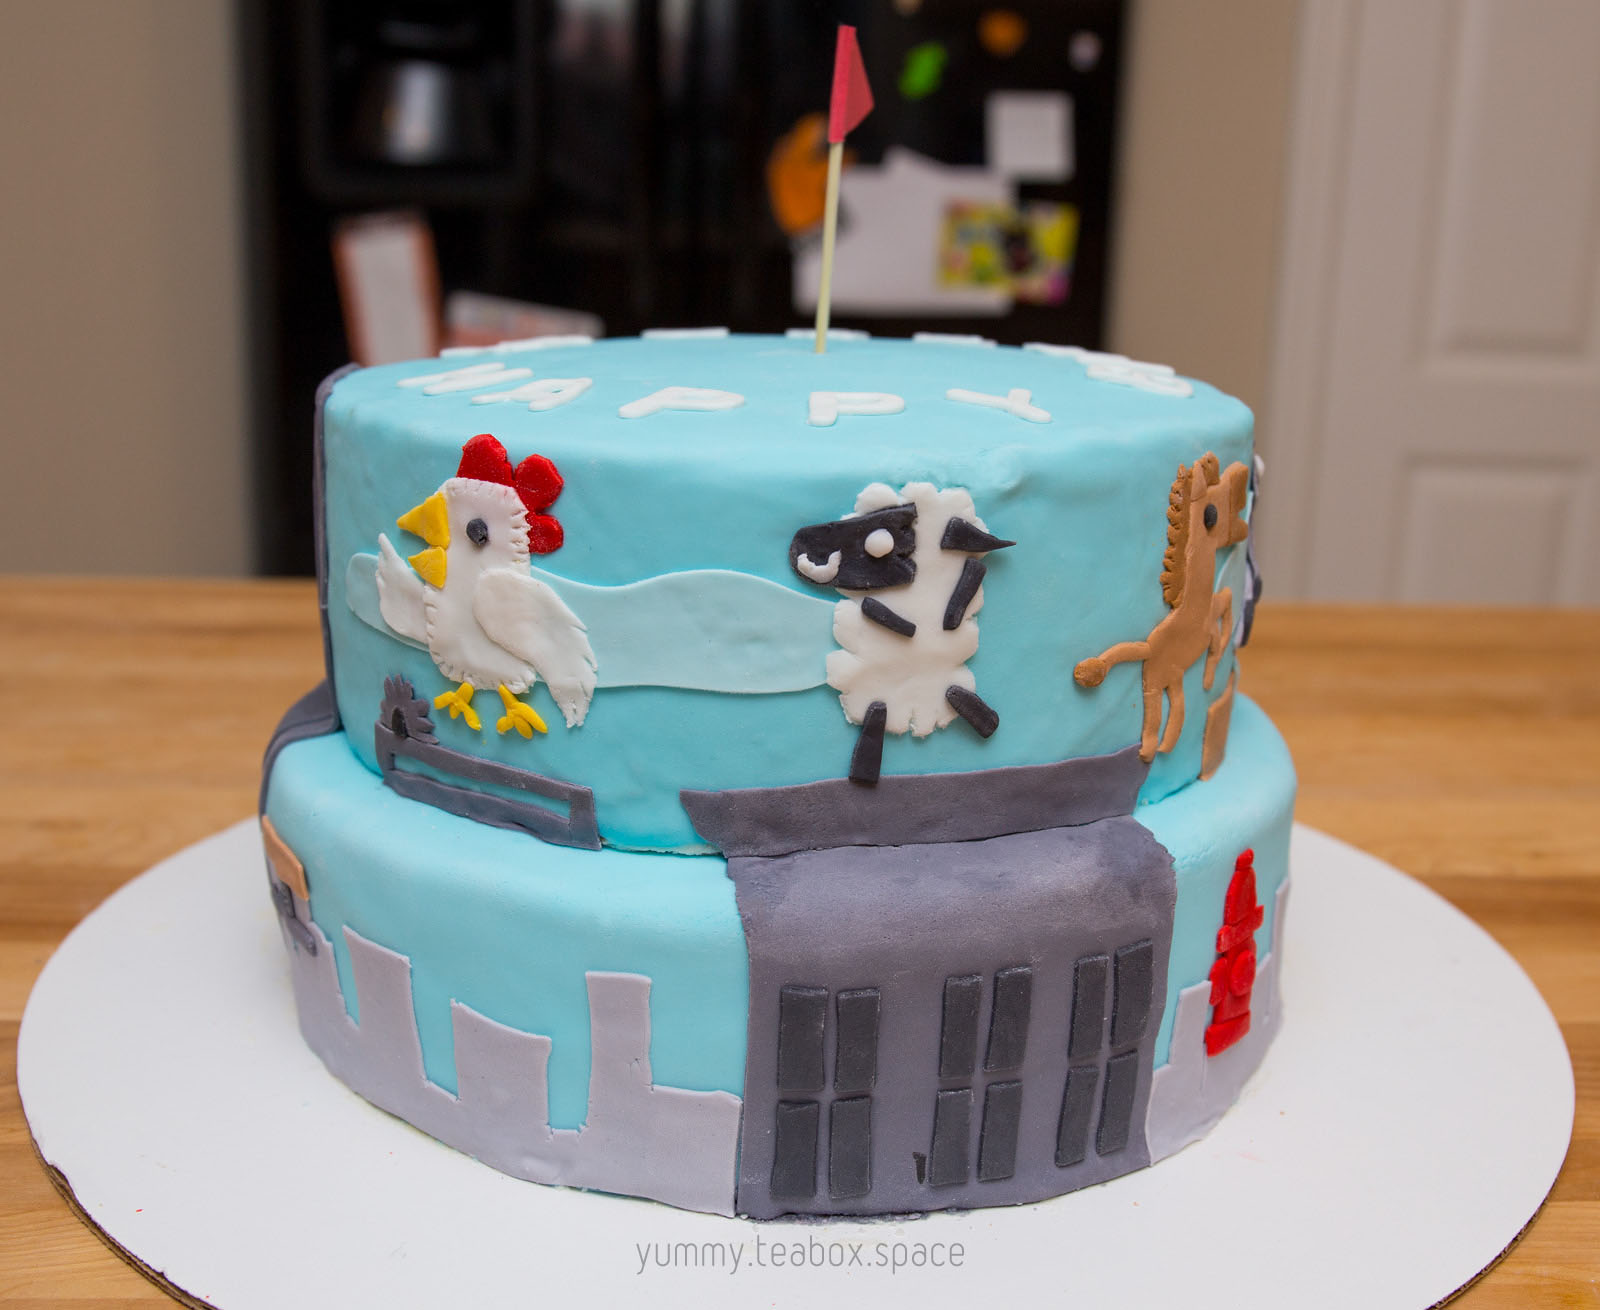 2-tier blue cake with images of chicken, sheep, and horse from Ultimate Chicken Horse on the side.